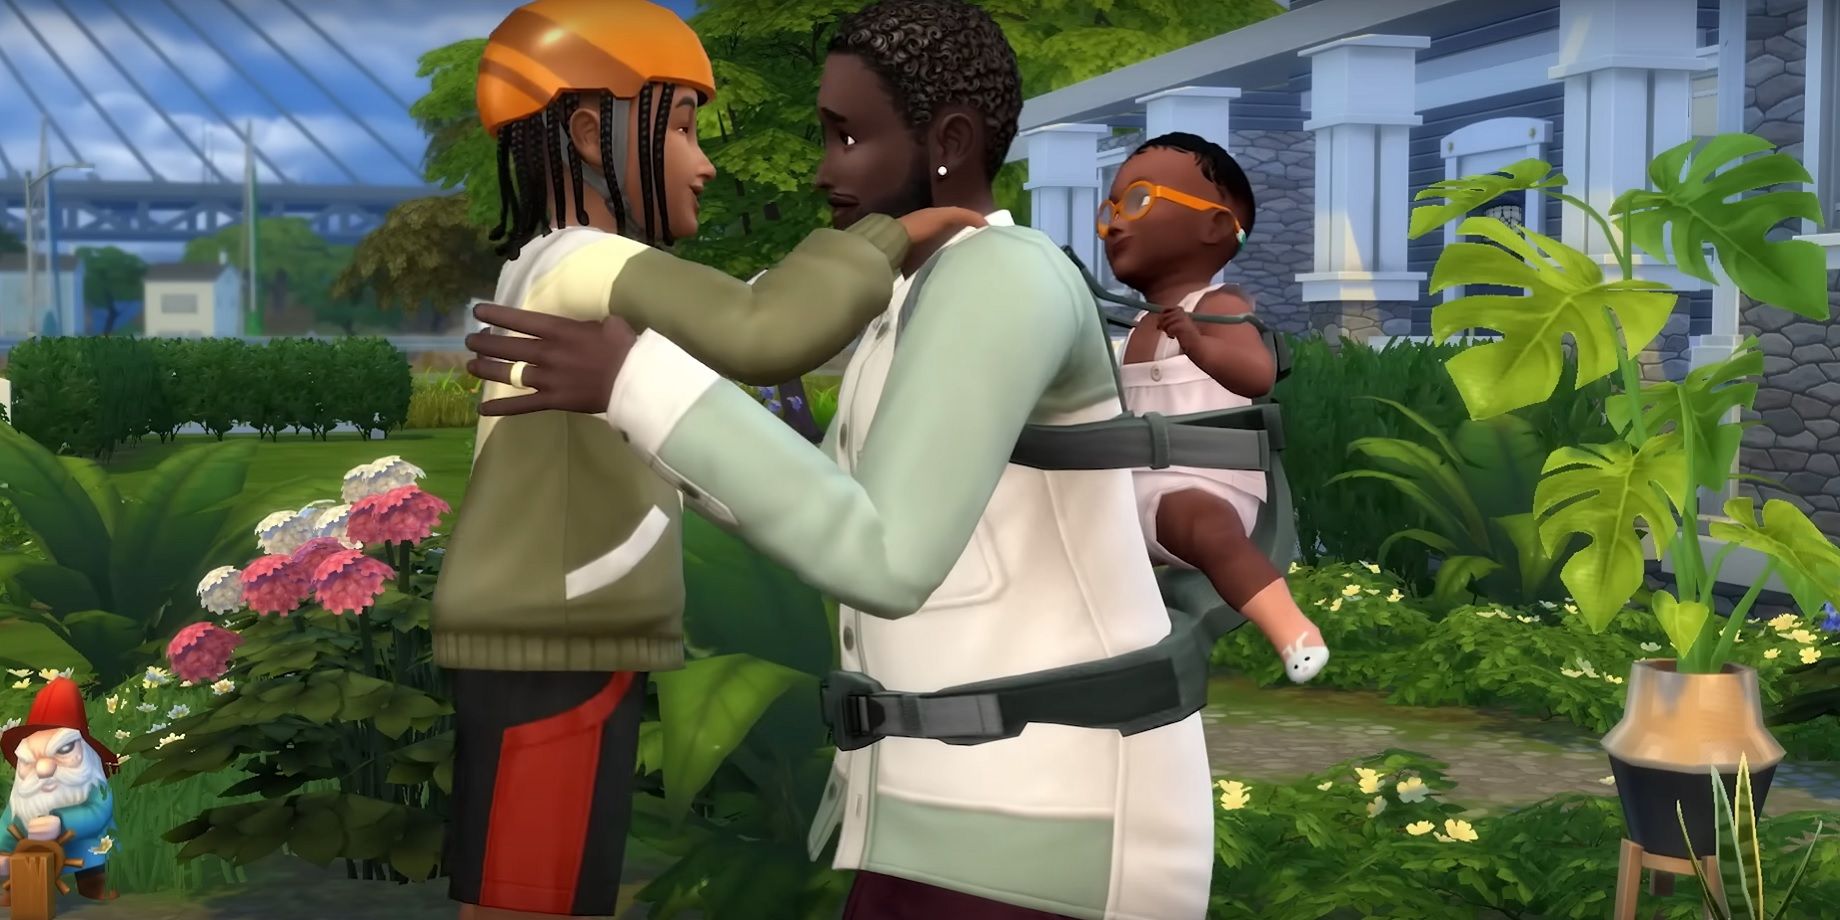 Everything new in The Sims 4: Growing Together expansion and free update